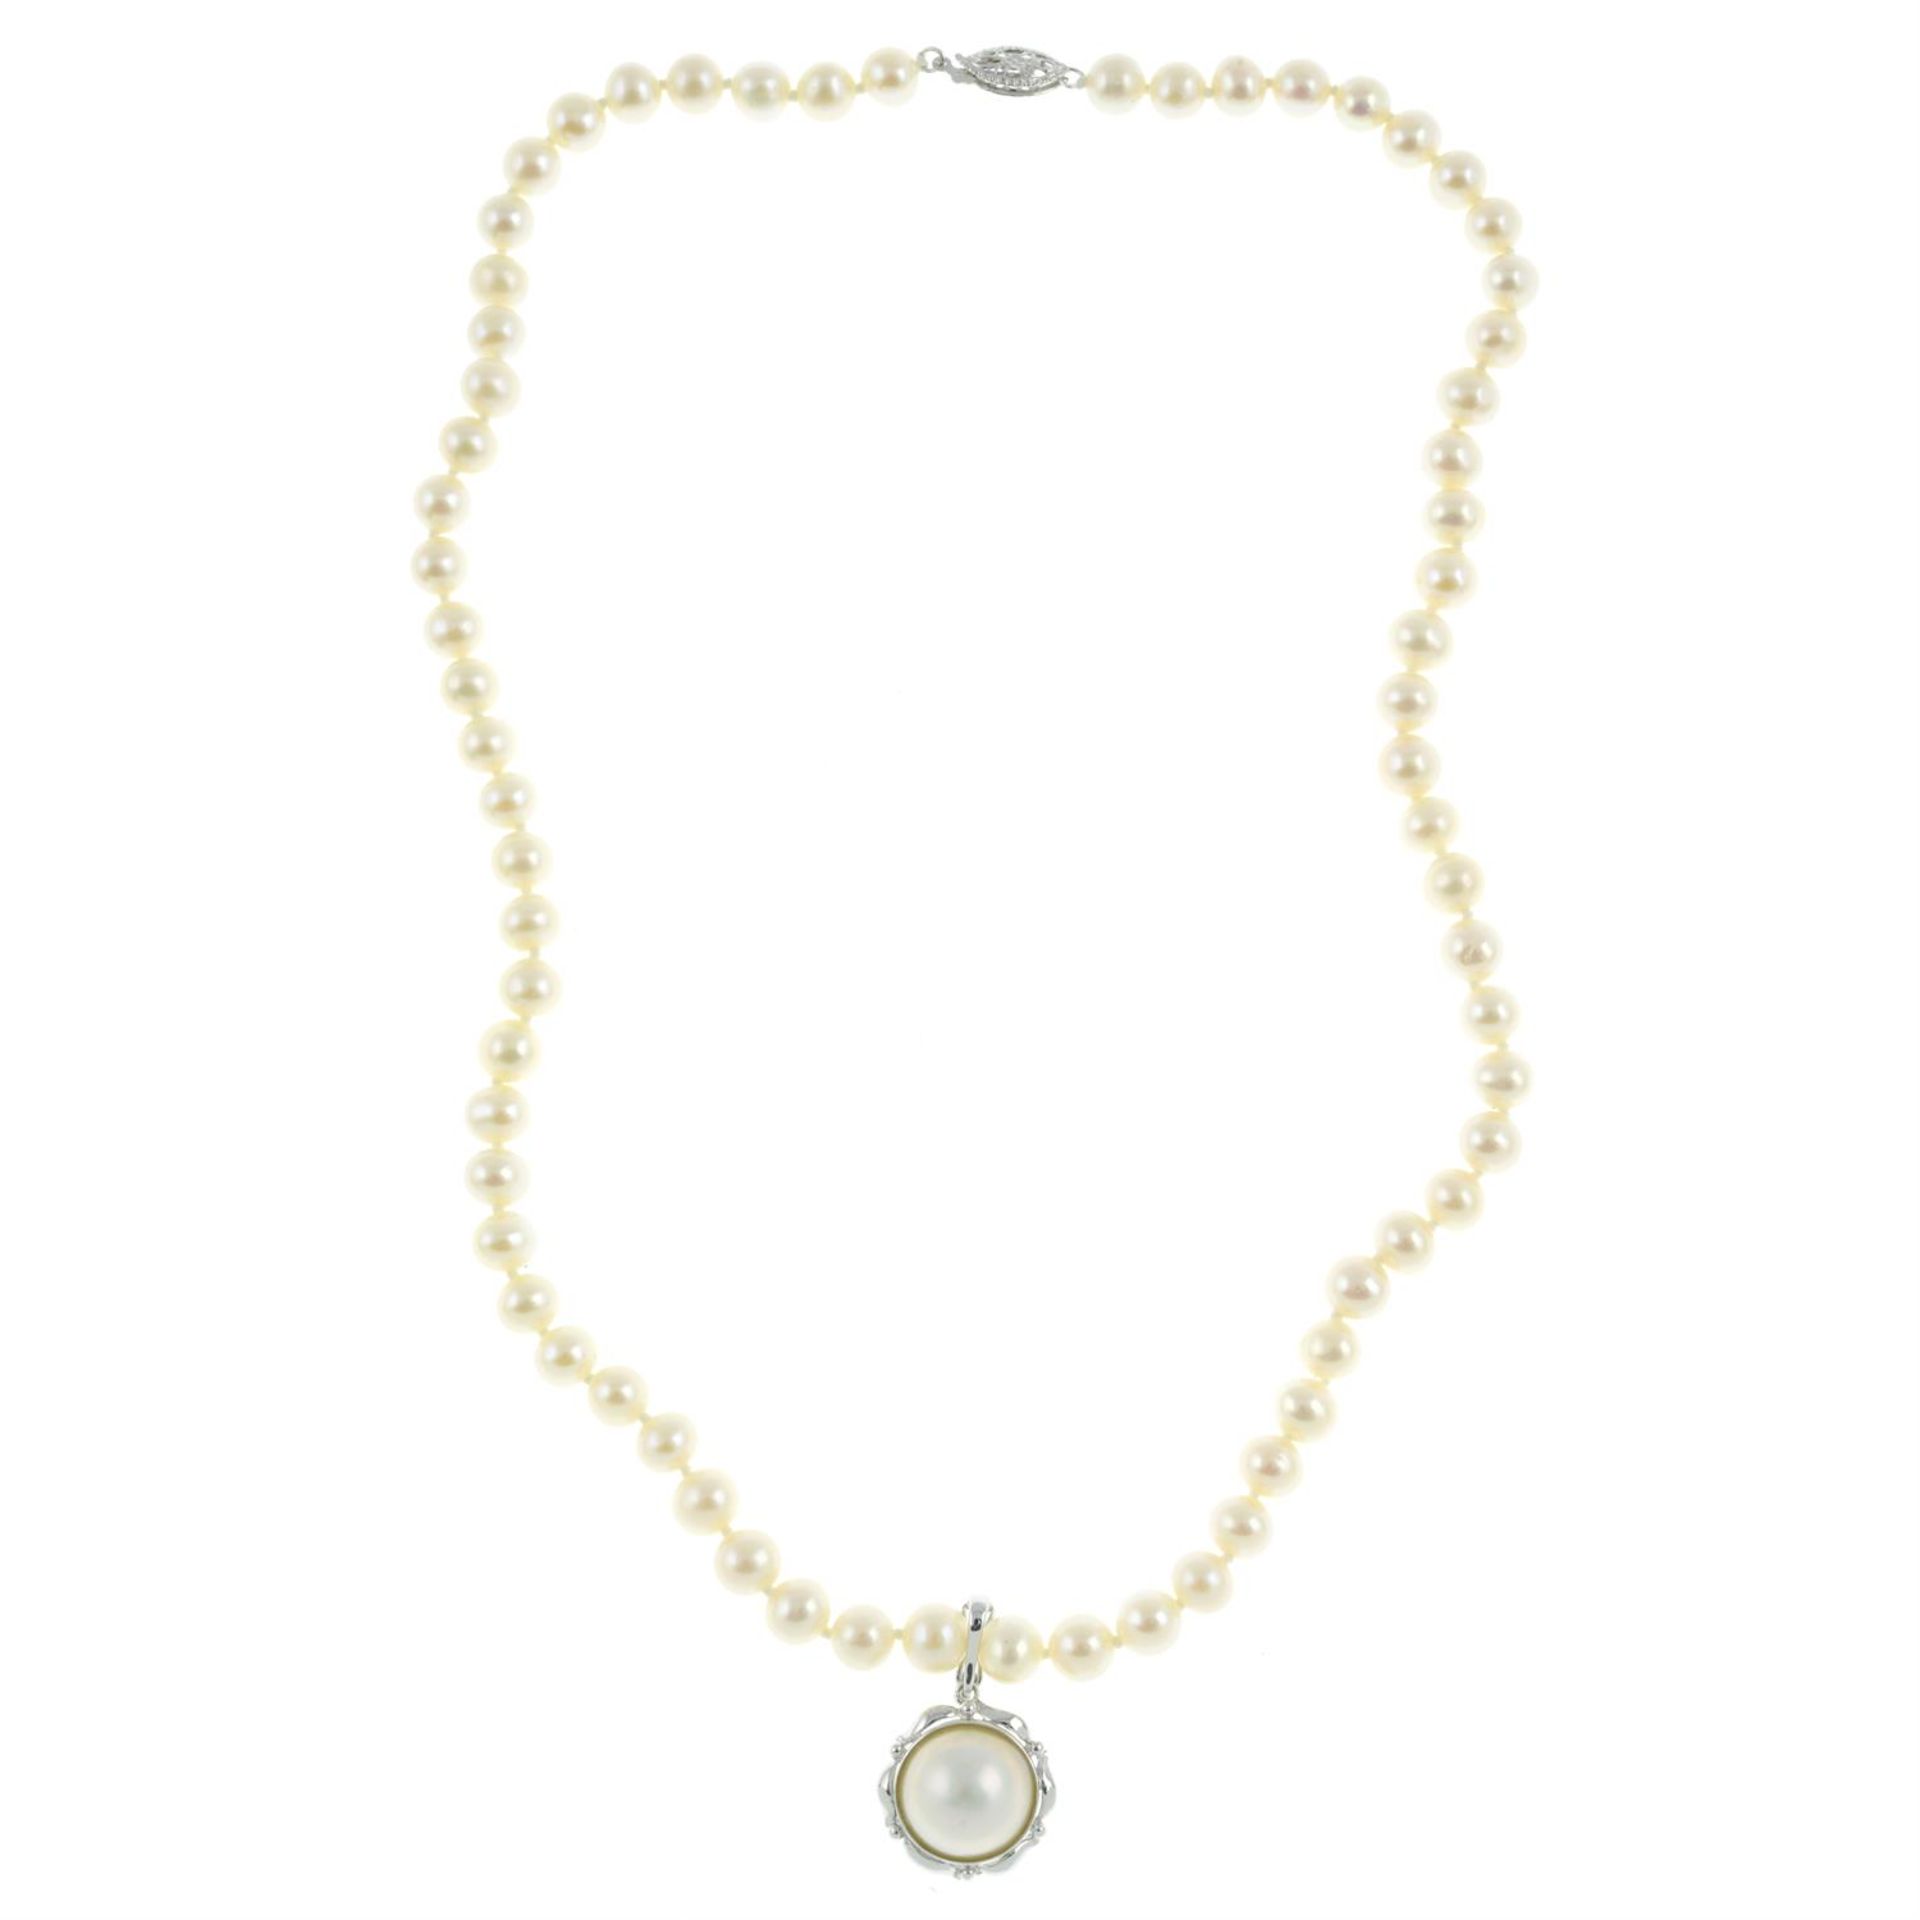 18ct gold cultured pearl necklace, with mabé pearl pendant